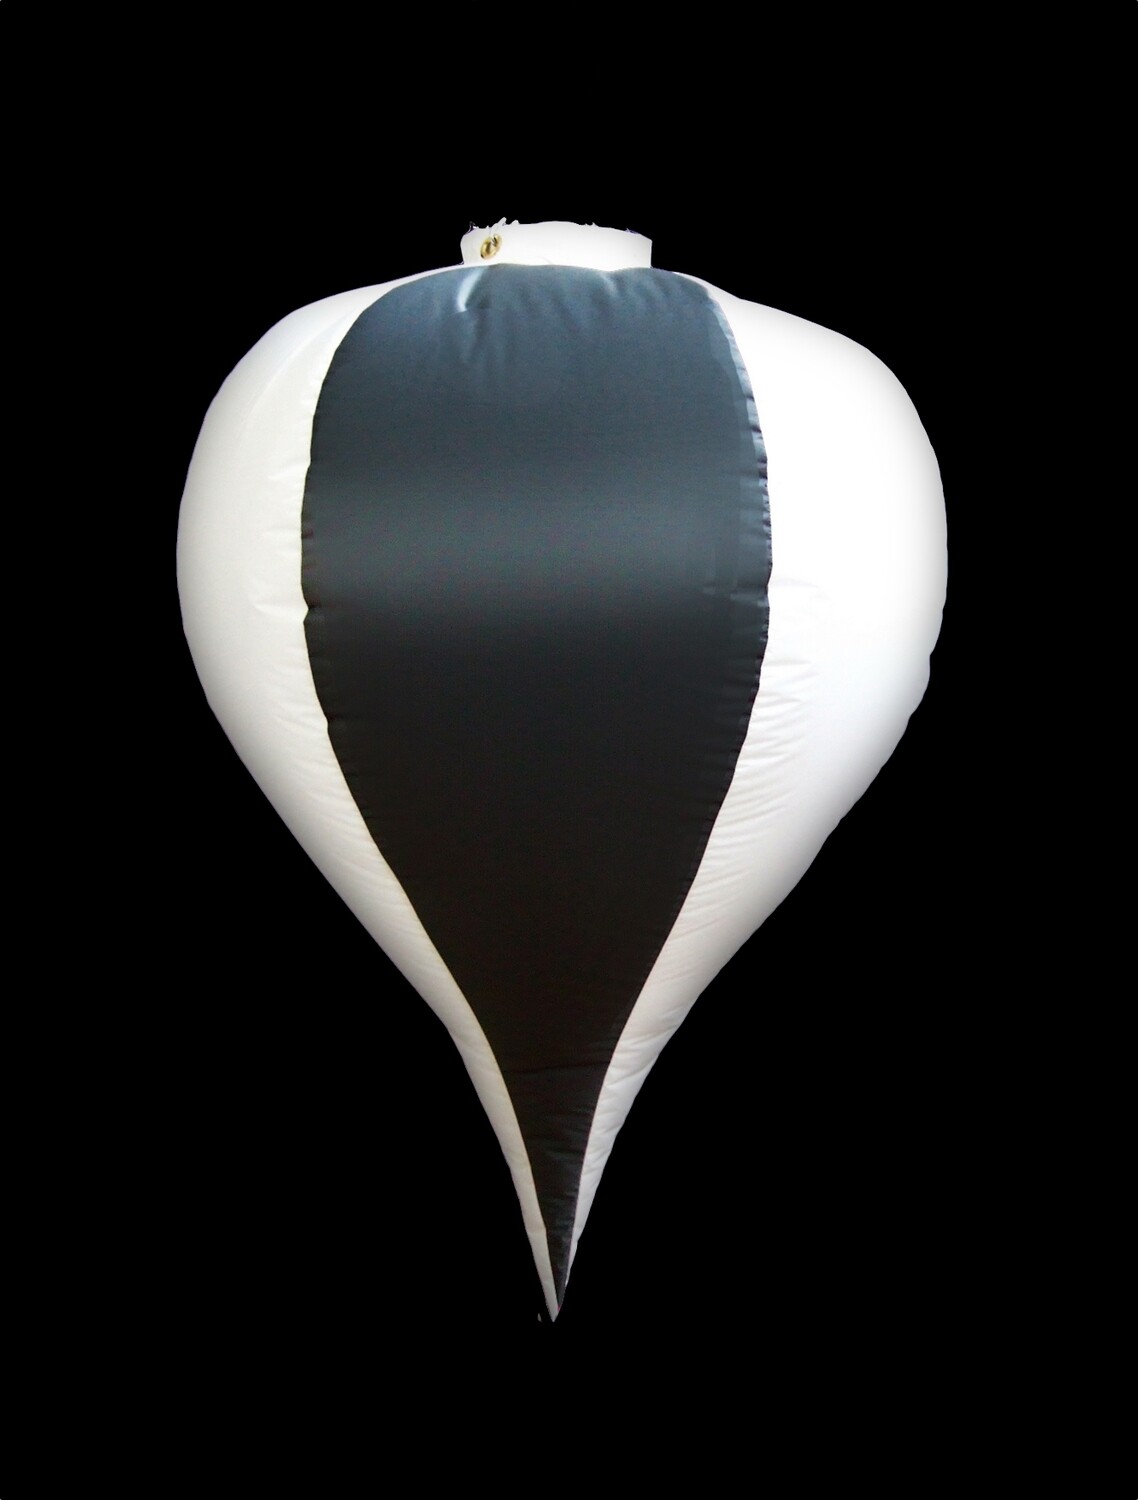 Hanging Inflatable Bauble #1- 2.2ft/66cm x 3ft/91cm